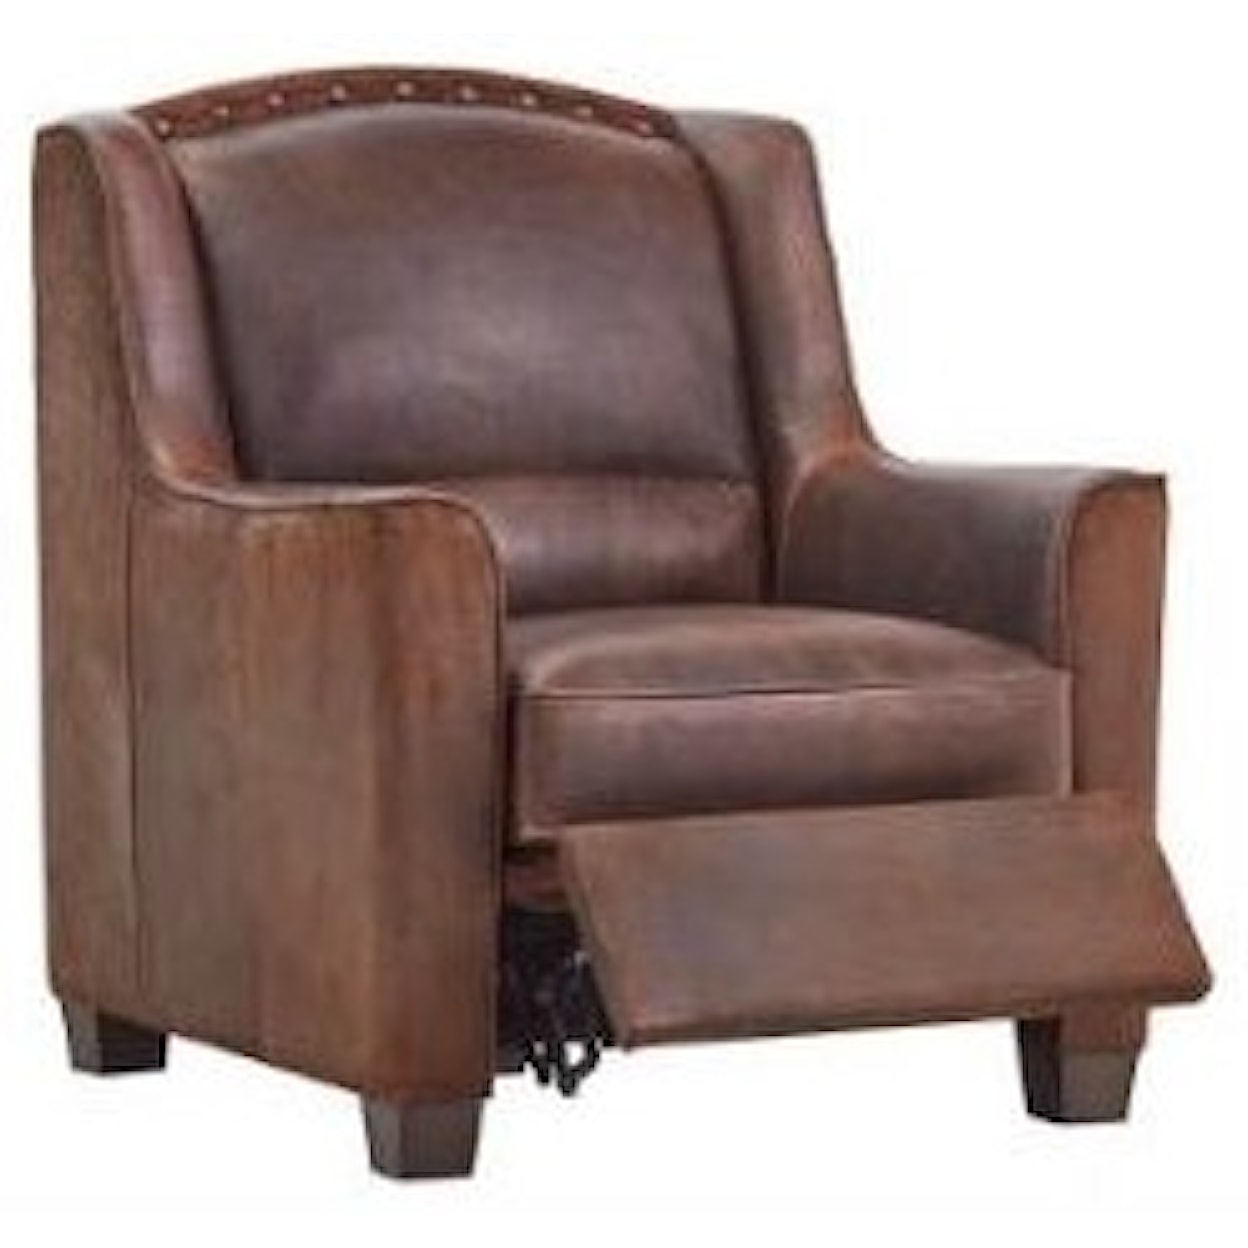 Artistic Leathers Signature Collection Recliner